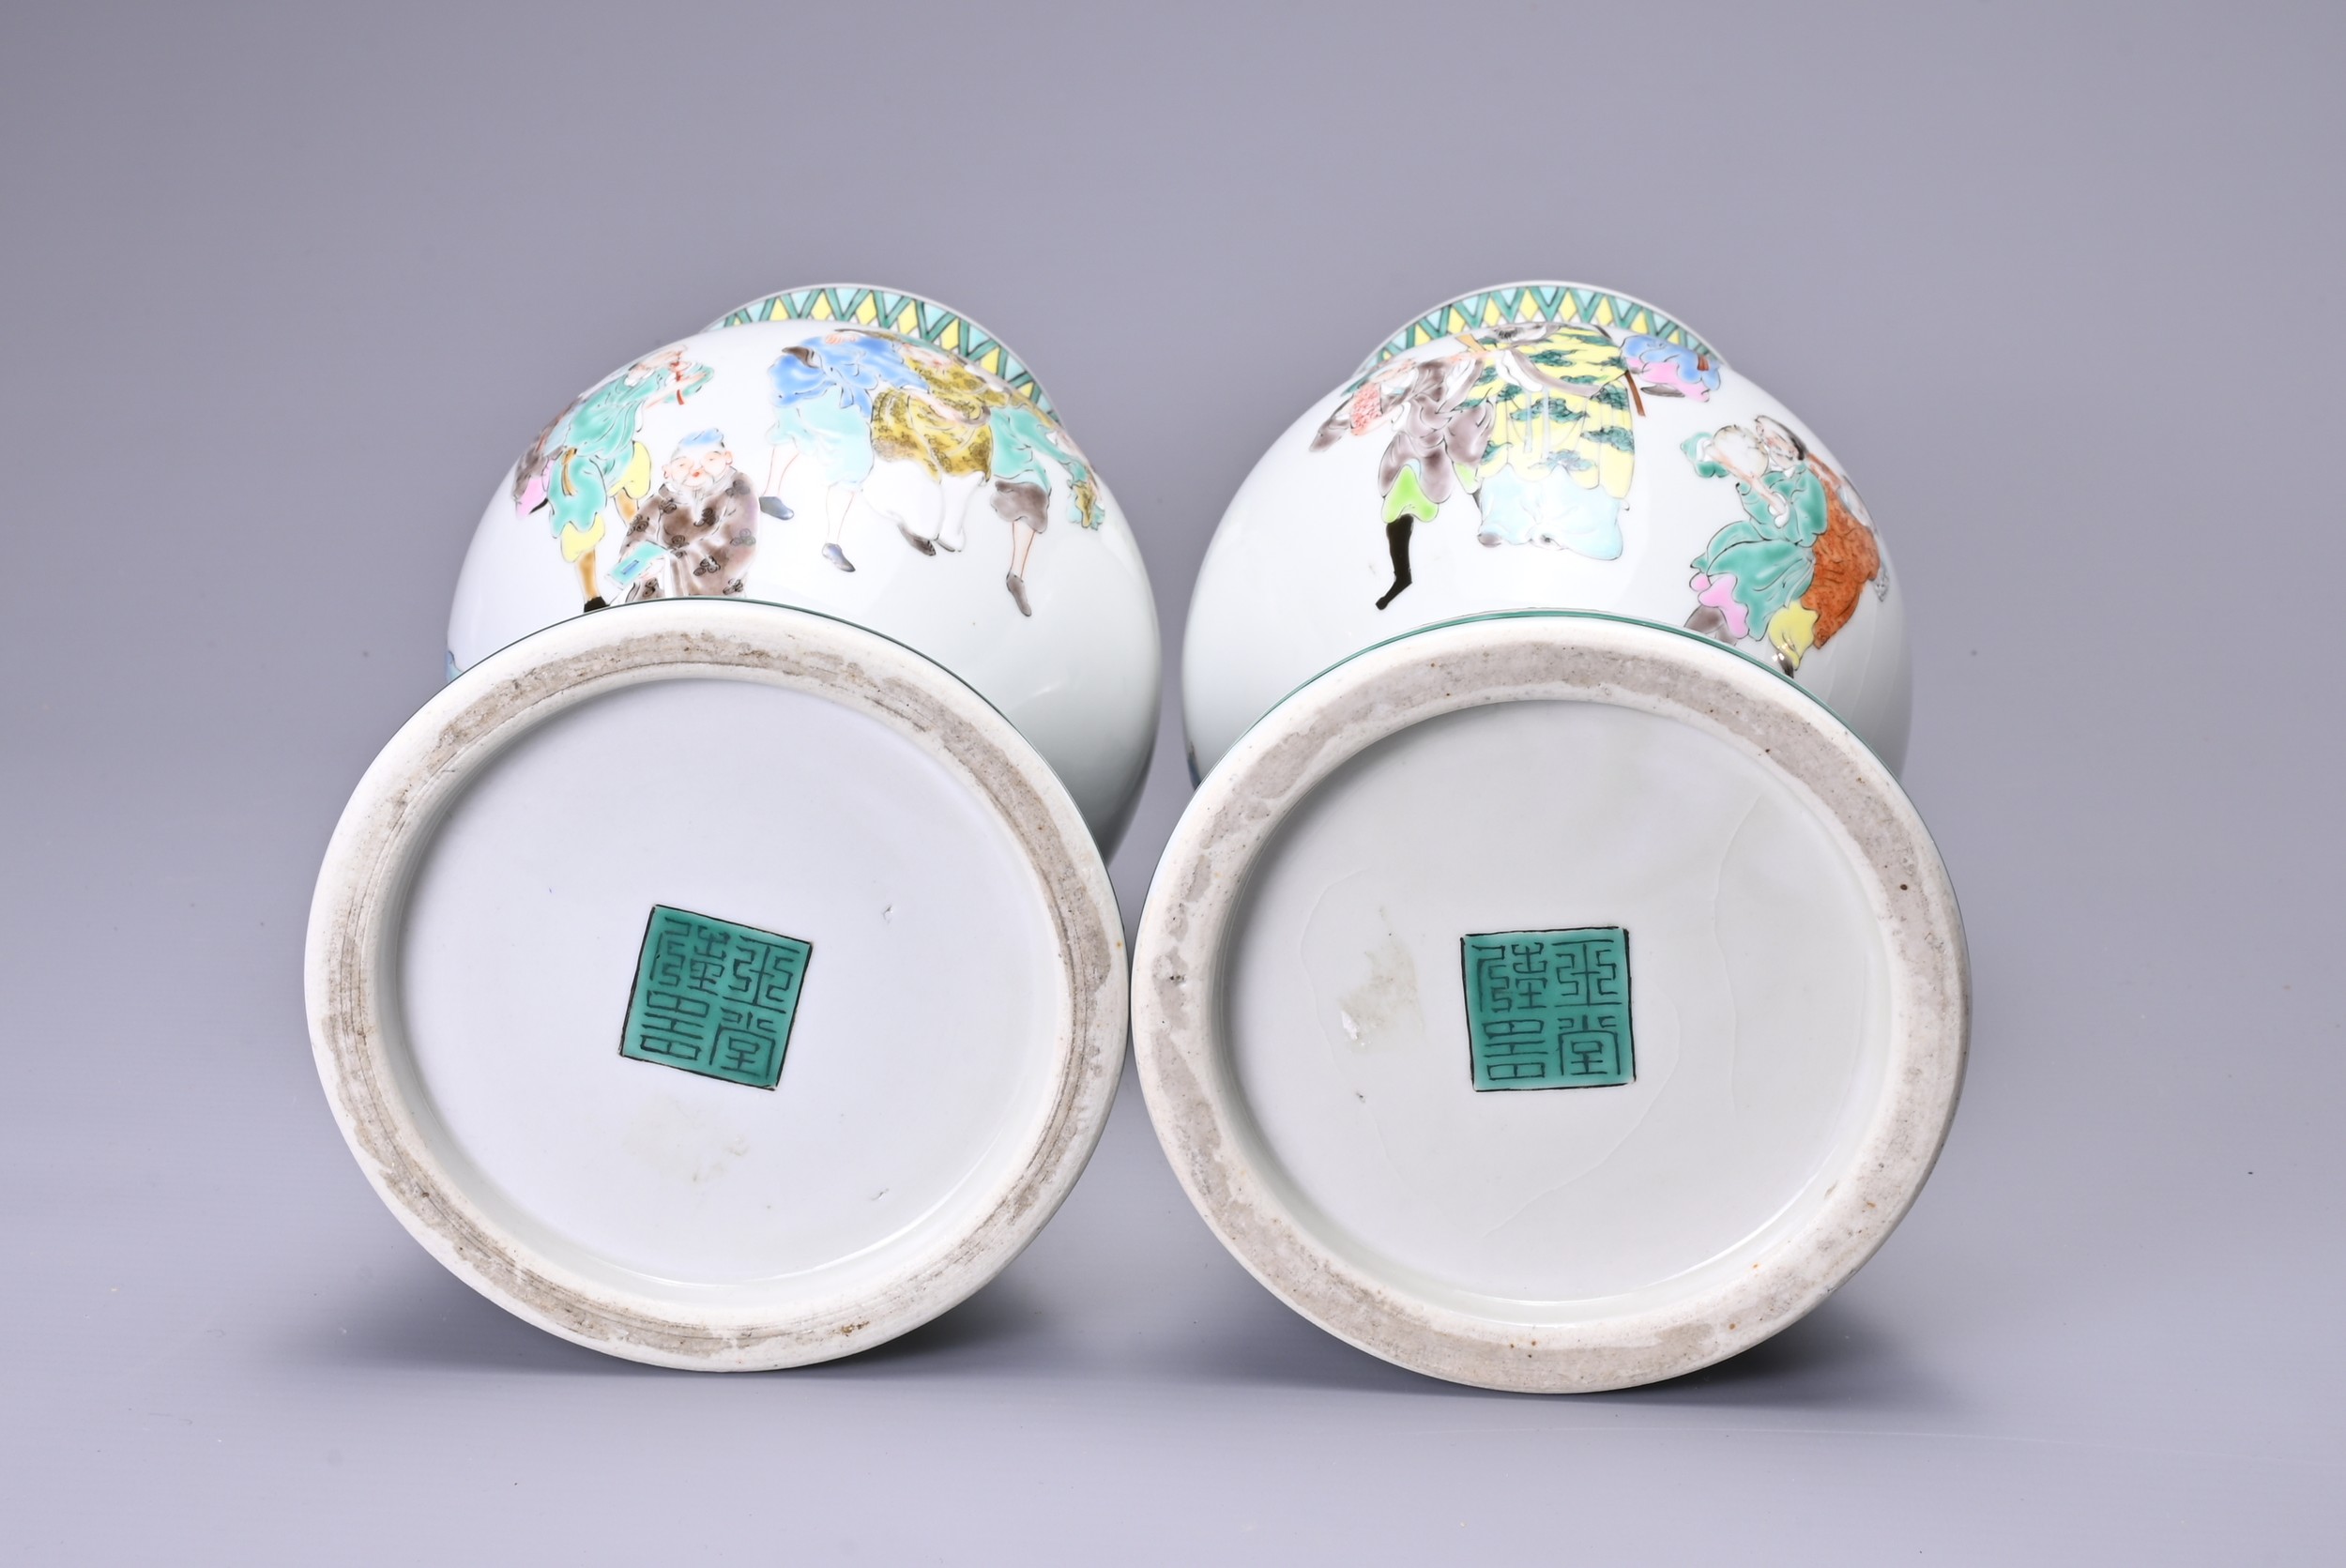 A PAIR OF 20TH CENTURY JAPANESE PORCELAIN FAMILLE VERTE-STYLE BALUSTER VASES. Each with green and - Image 5 of 7